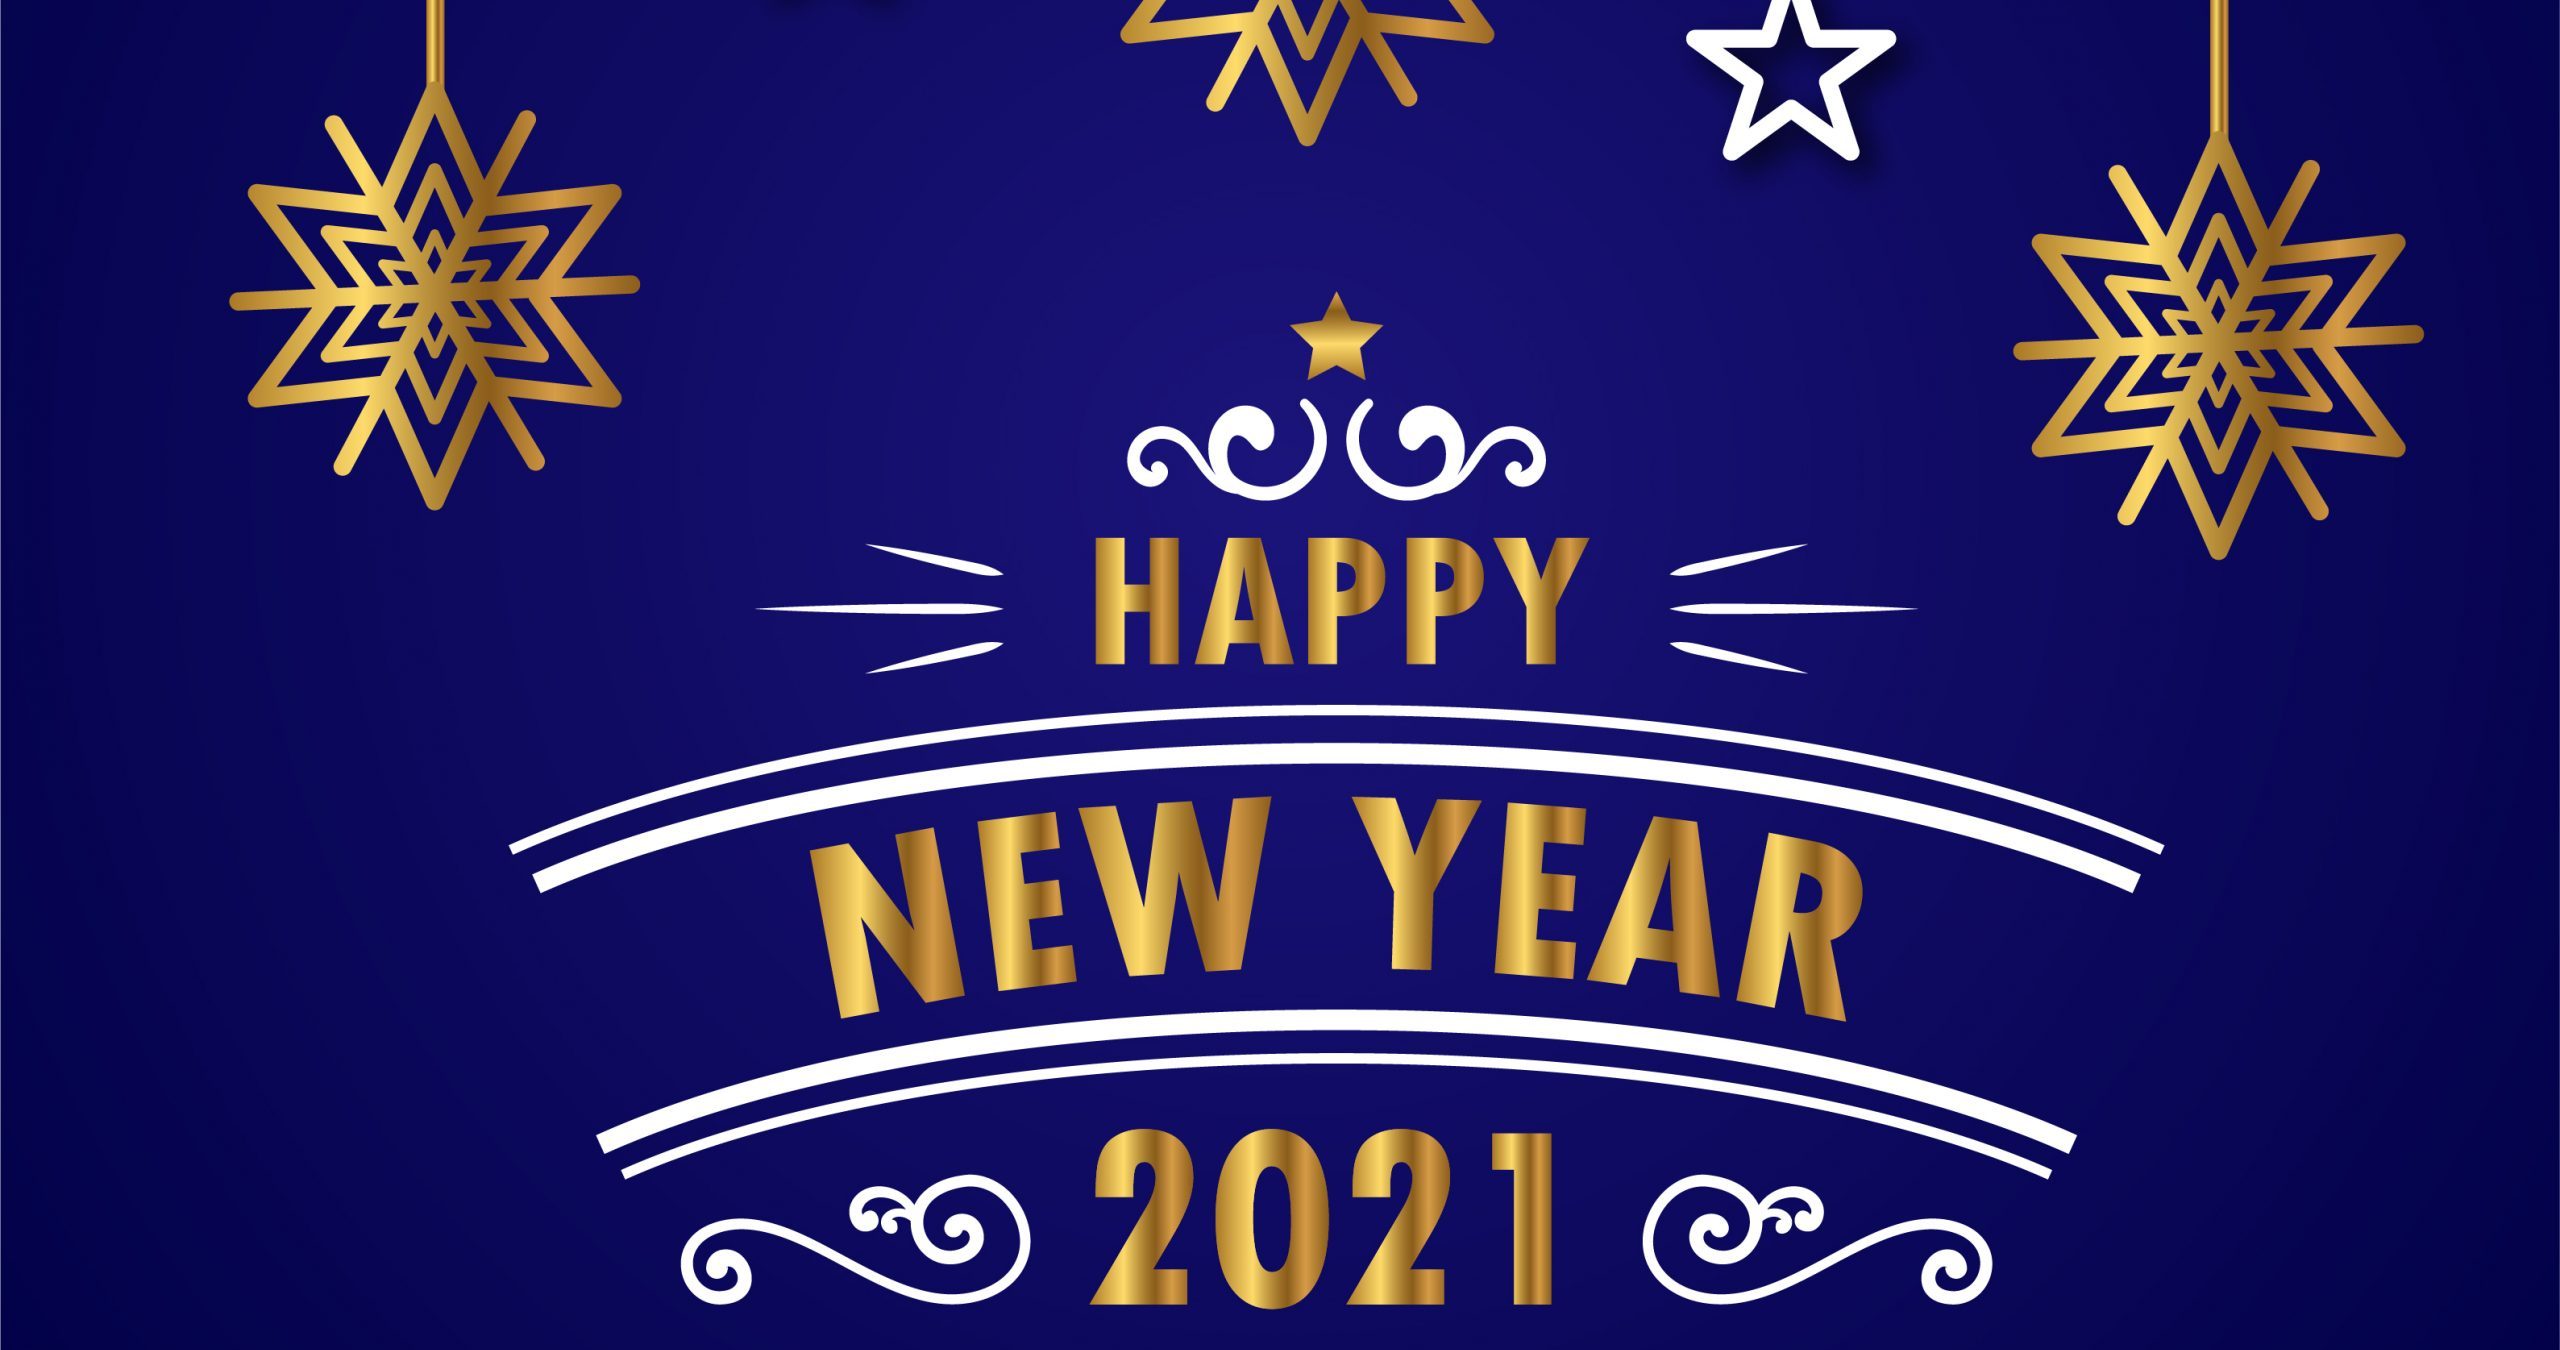 2021 January: Welcome to a New & Exciting 2021